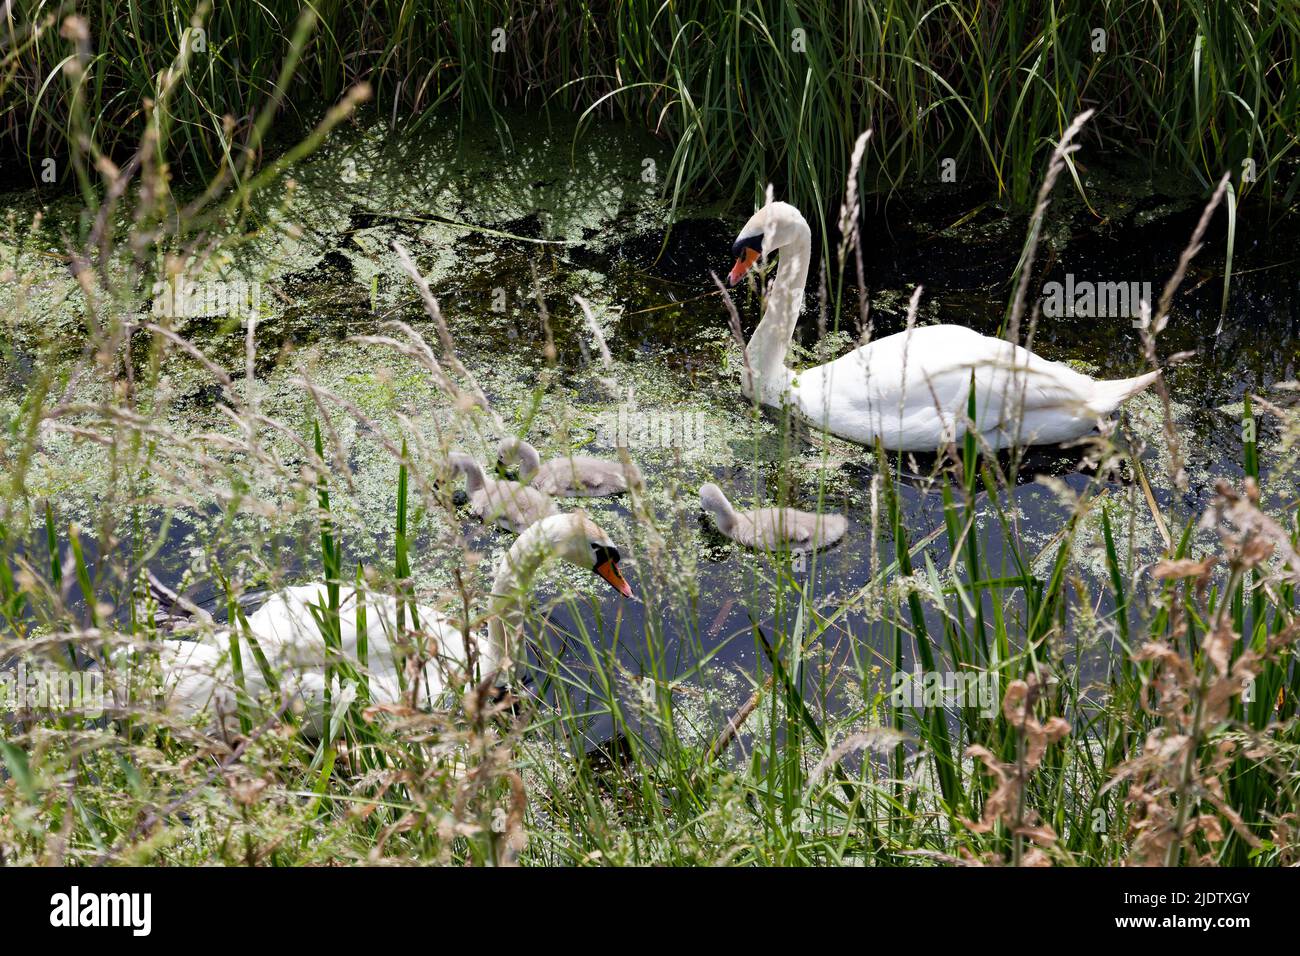 View of a family of Swans on the South Stream, Lydden Valley,  Deal, Kent Stock Photo